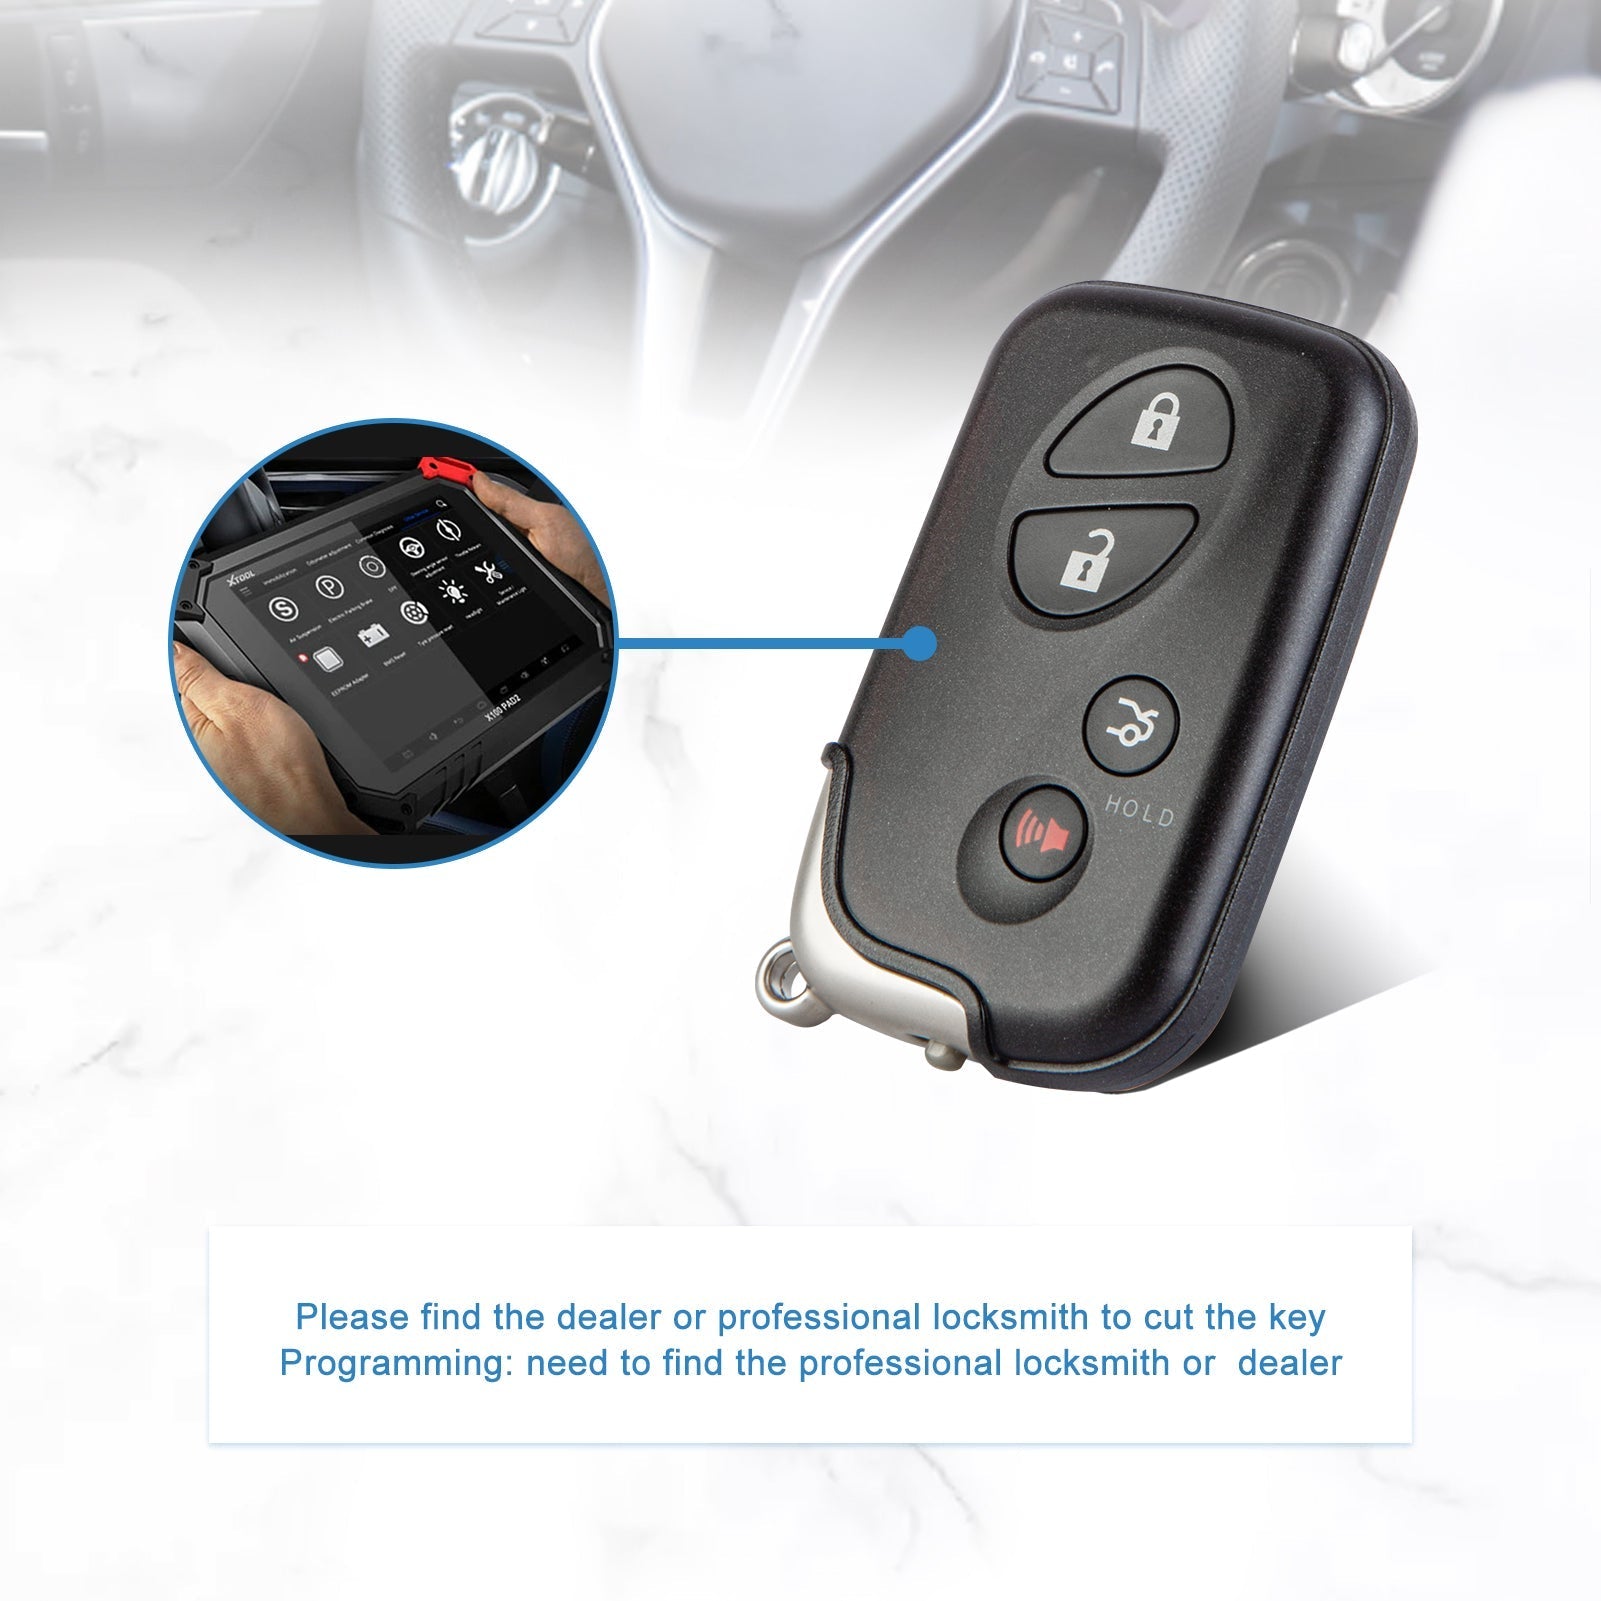 Smart car Key fob Replacement for ES is GS LS 2009-2012 Keyless Fob with FCC ID: HYQ14AAB 3370 Board